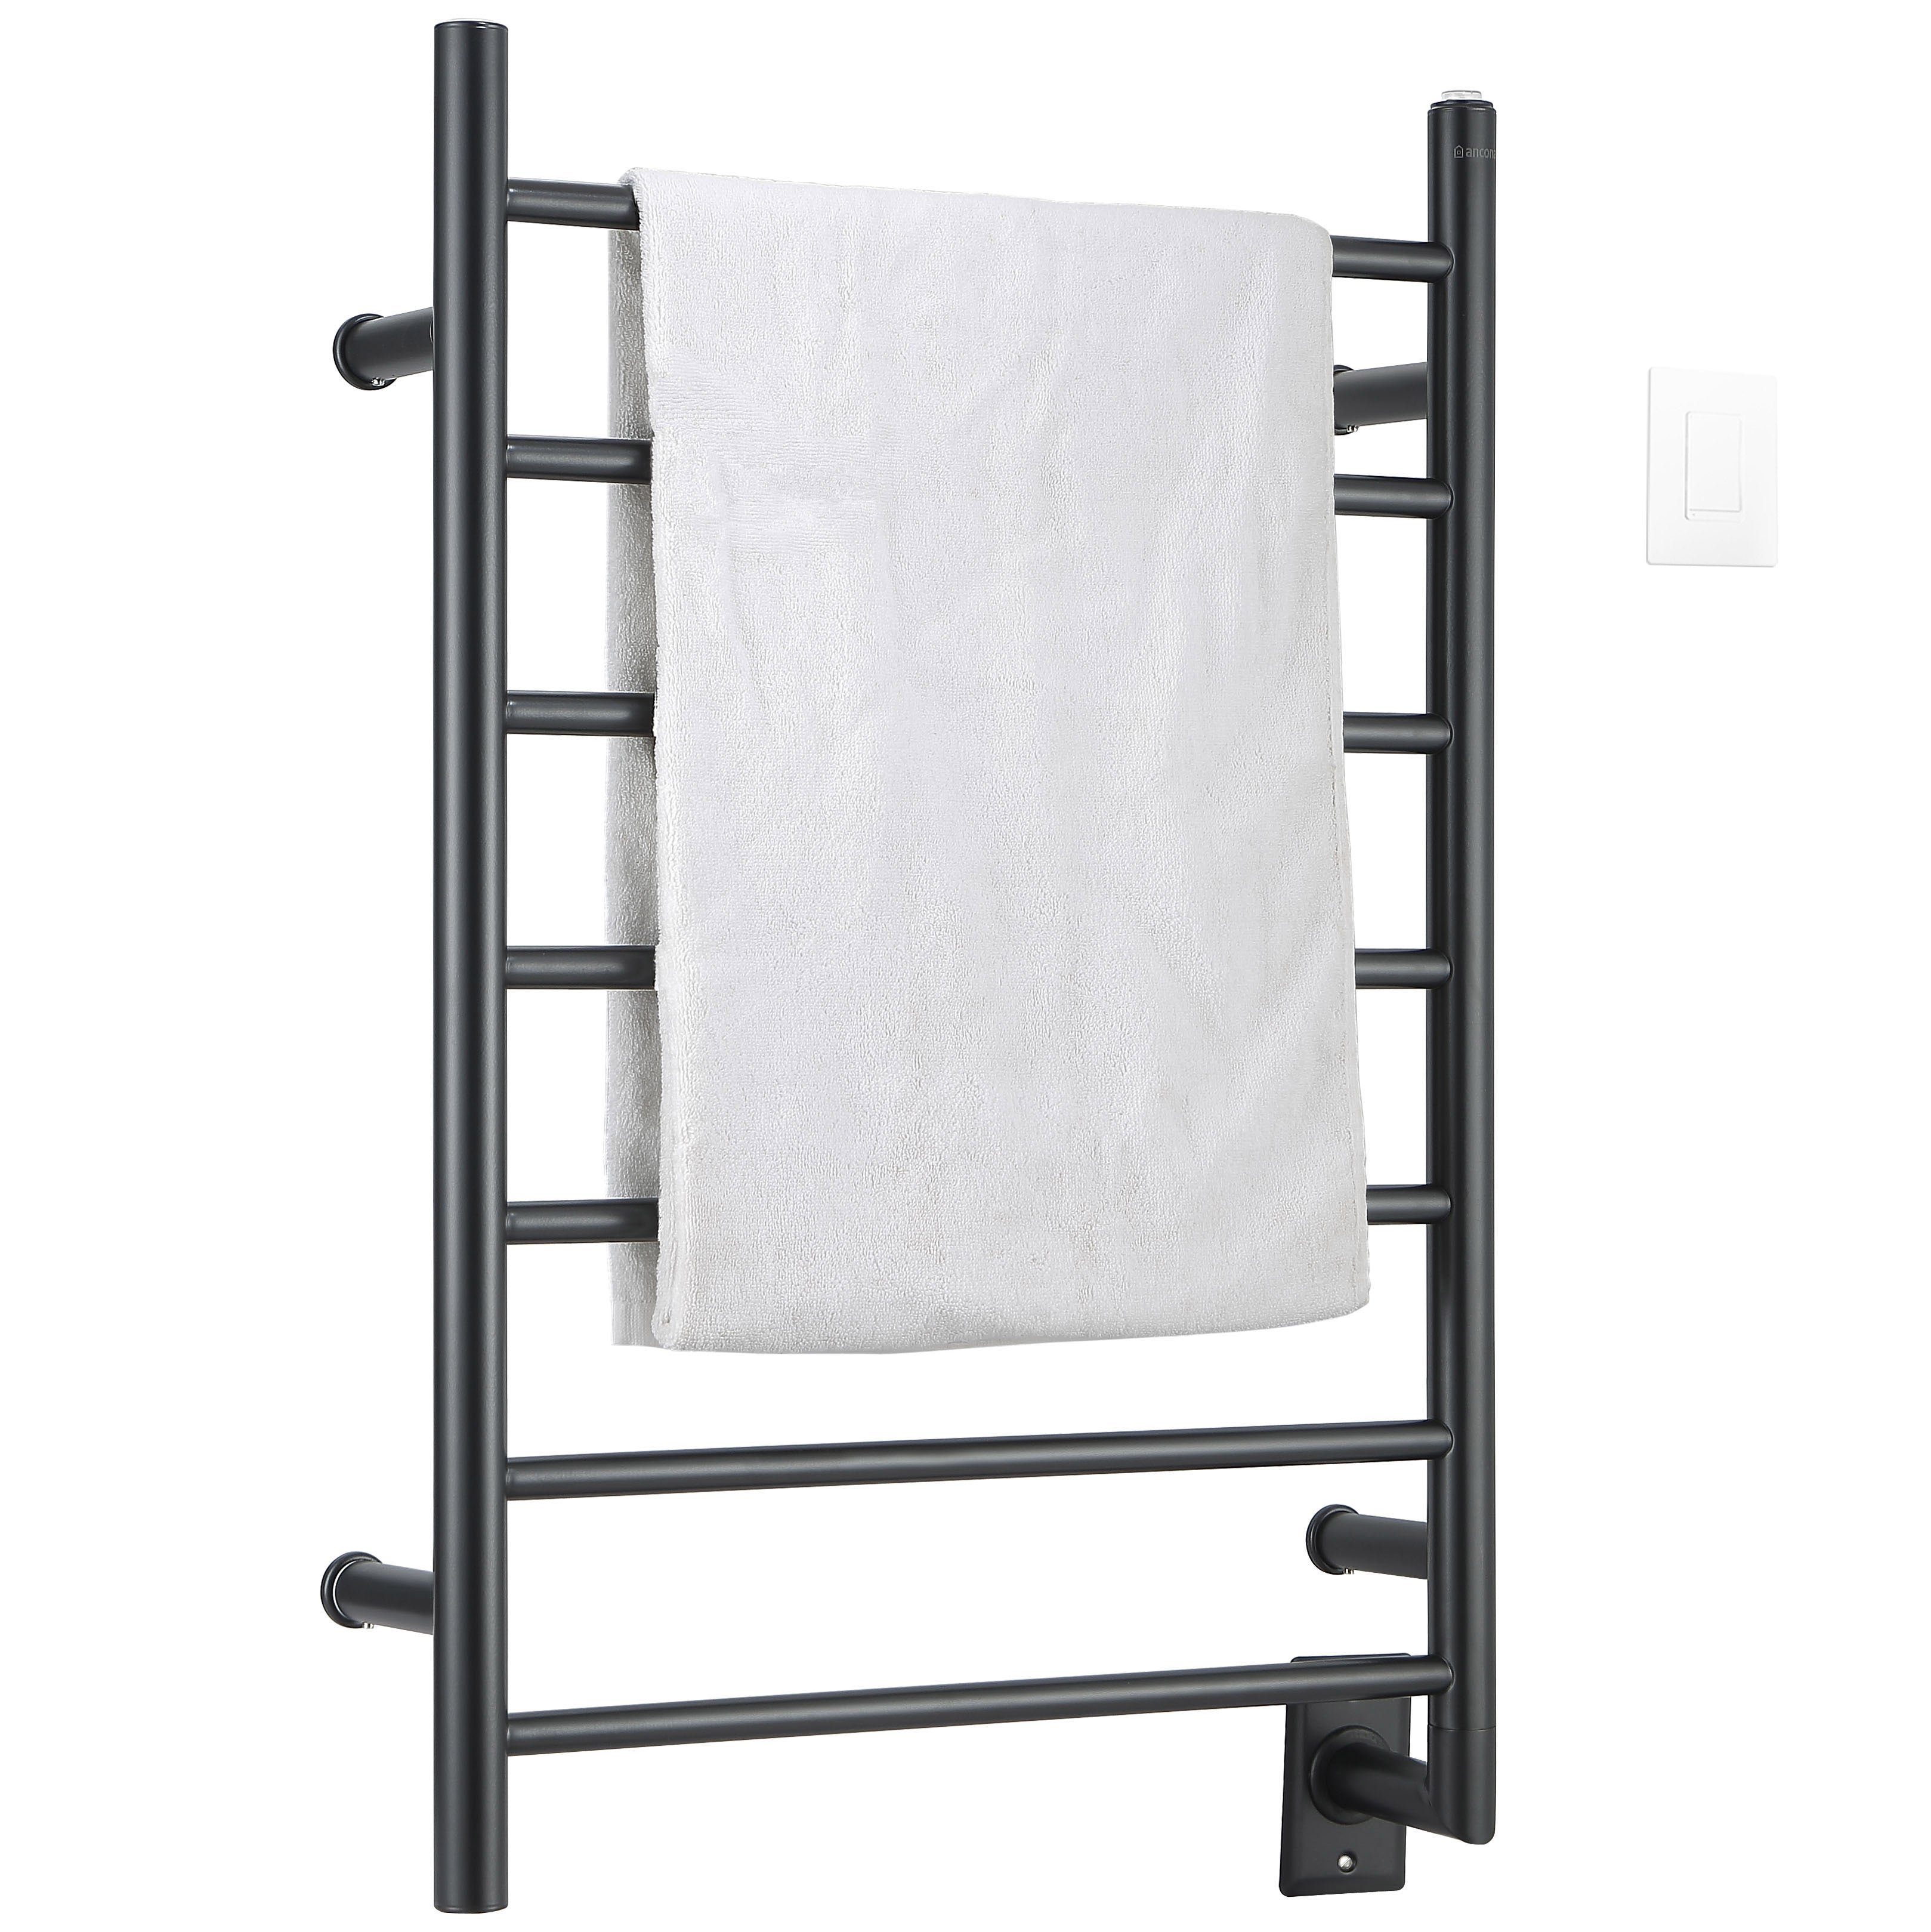 Ancona Comfort 7-Bar Hardwired Towel Warmer in Matte Black with Wifi Timer